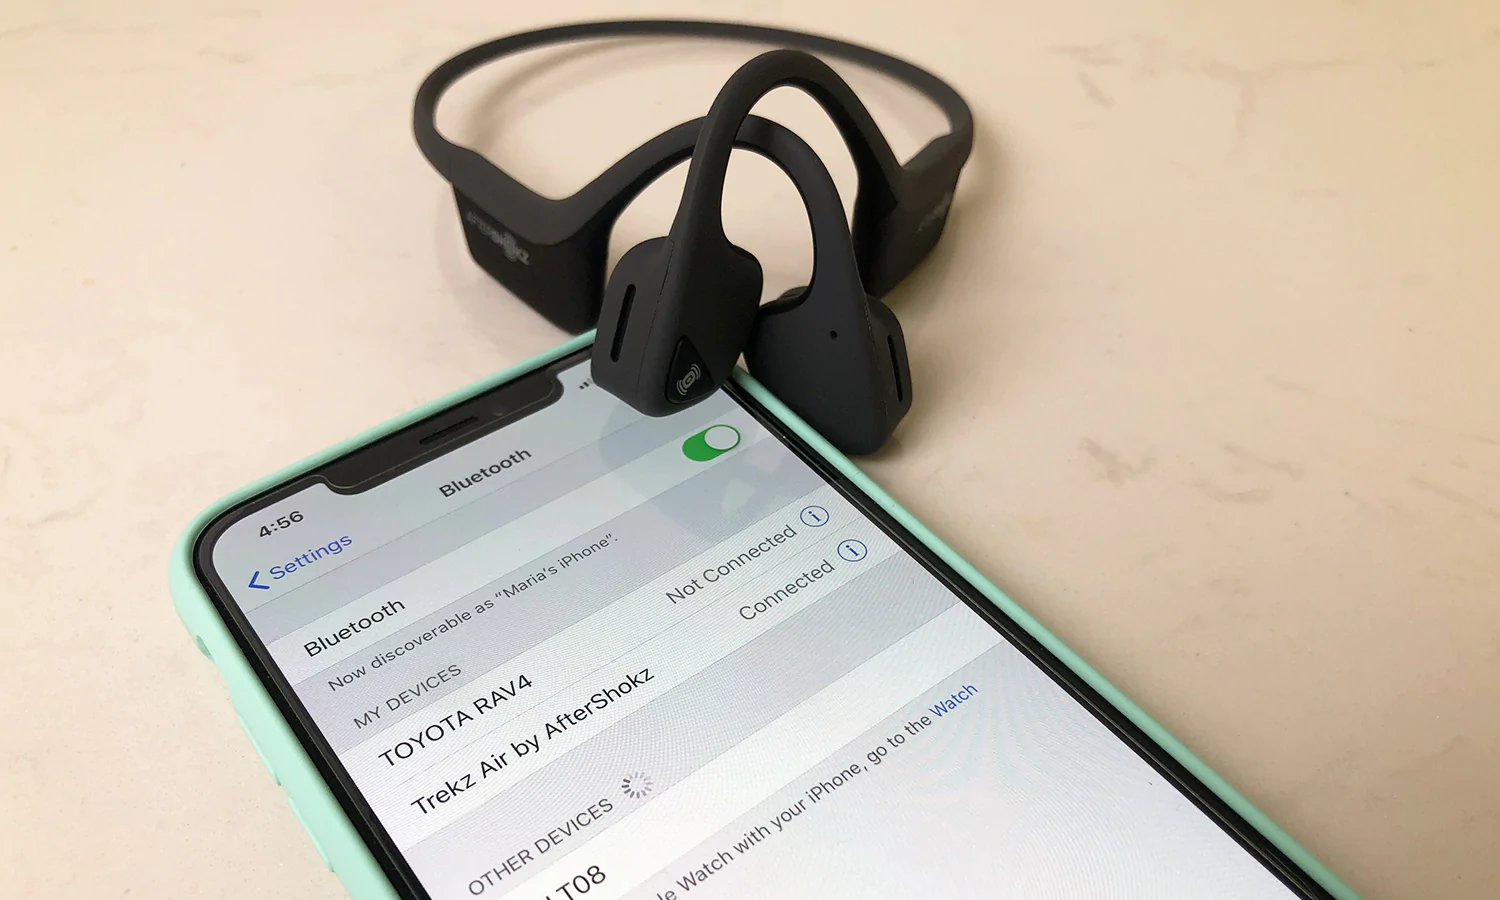 How To Pair Shokz With iPhone?